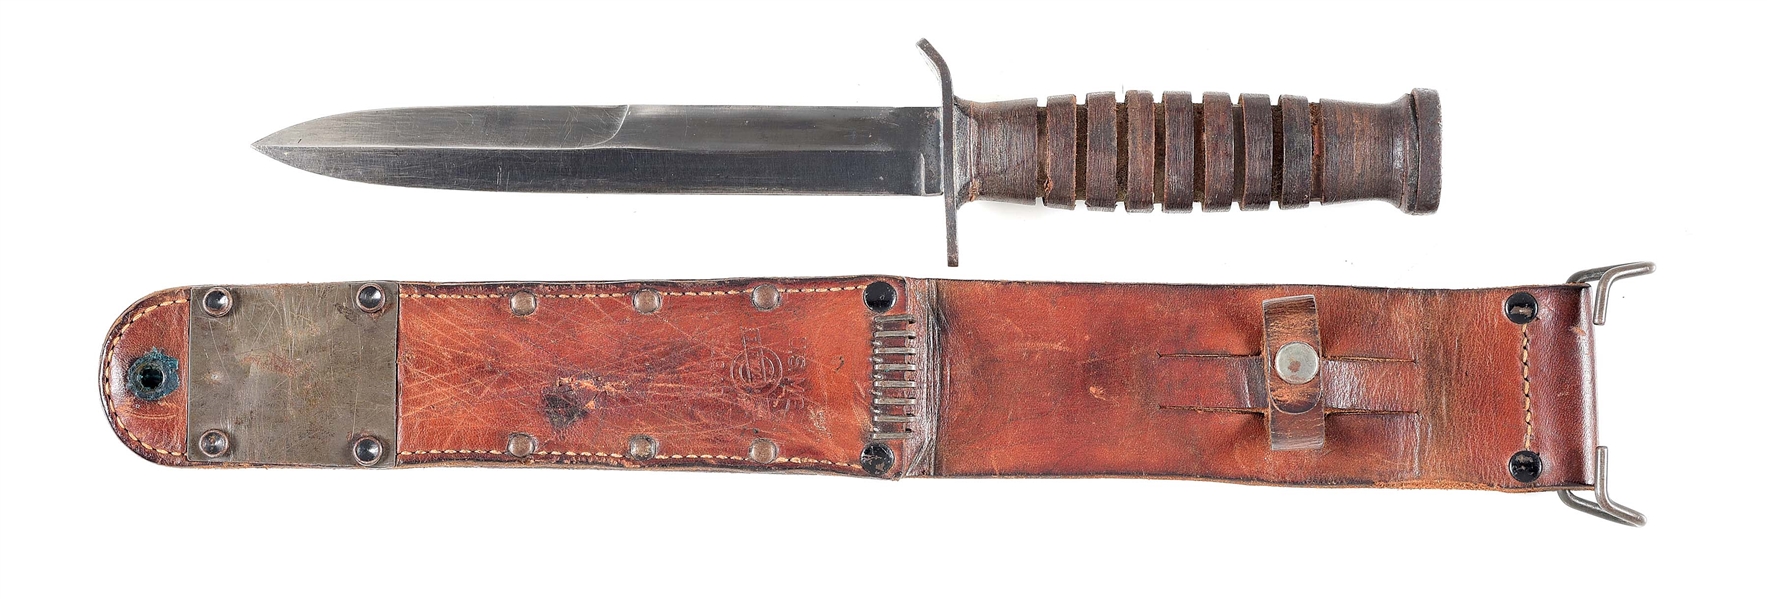 US WWII CASE M3 FIGHTING KNIFE WITH M6 SCABBARD.